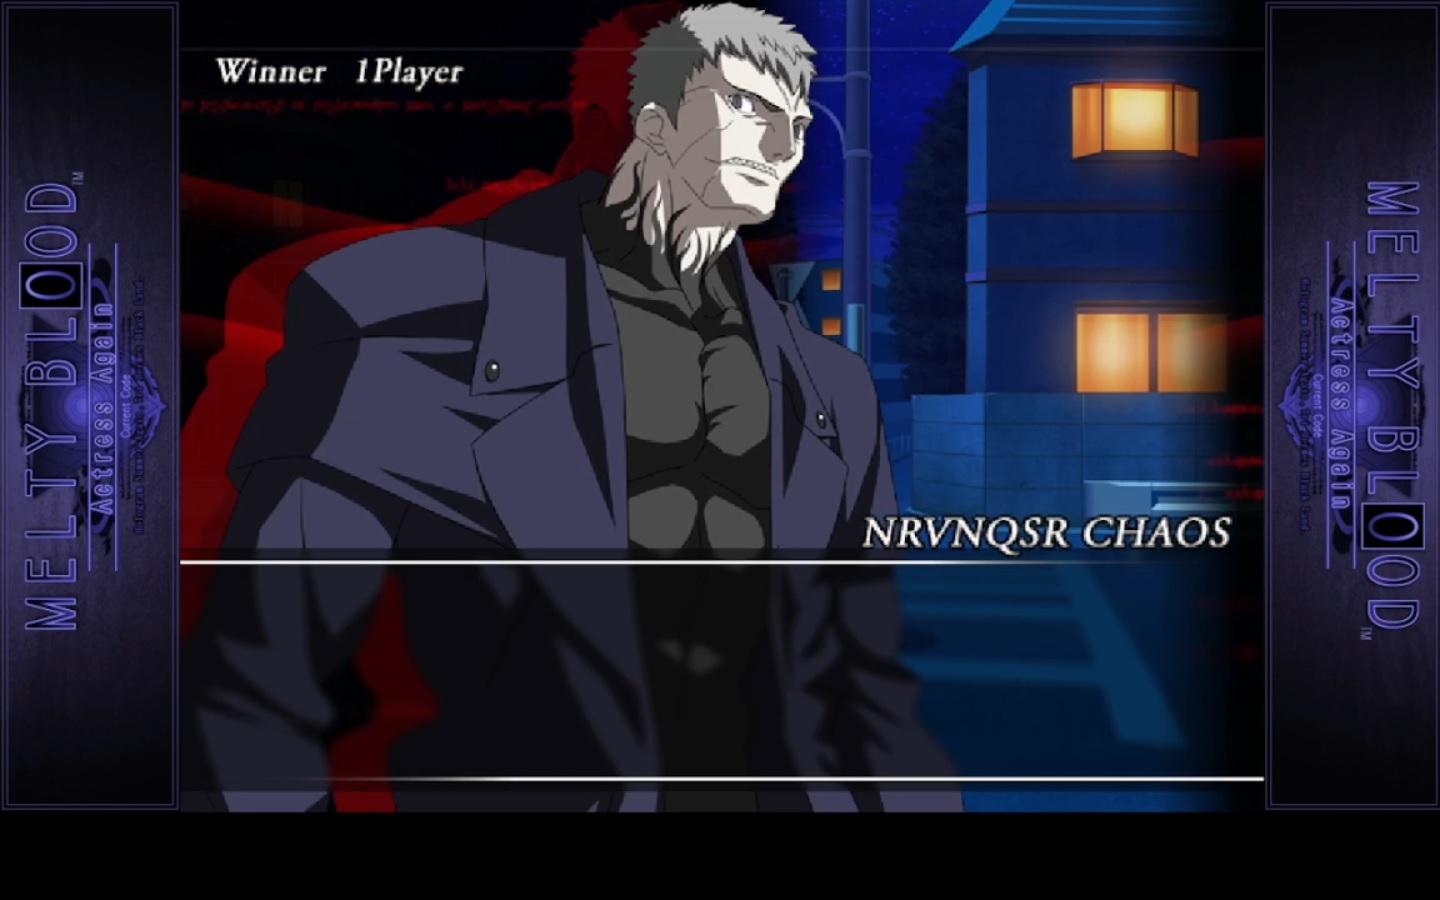 MELTY BLOOD Actress Again Current Code.Nrvnqsr Chaos vs Warachia [ネロ・カオスVSワラキアの夜]